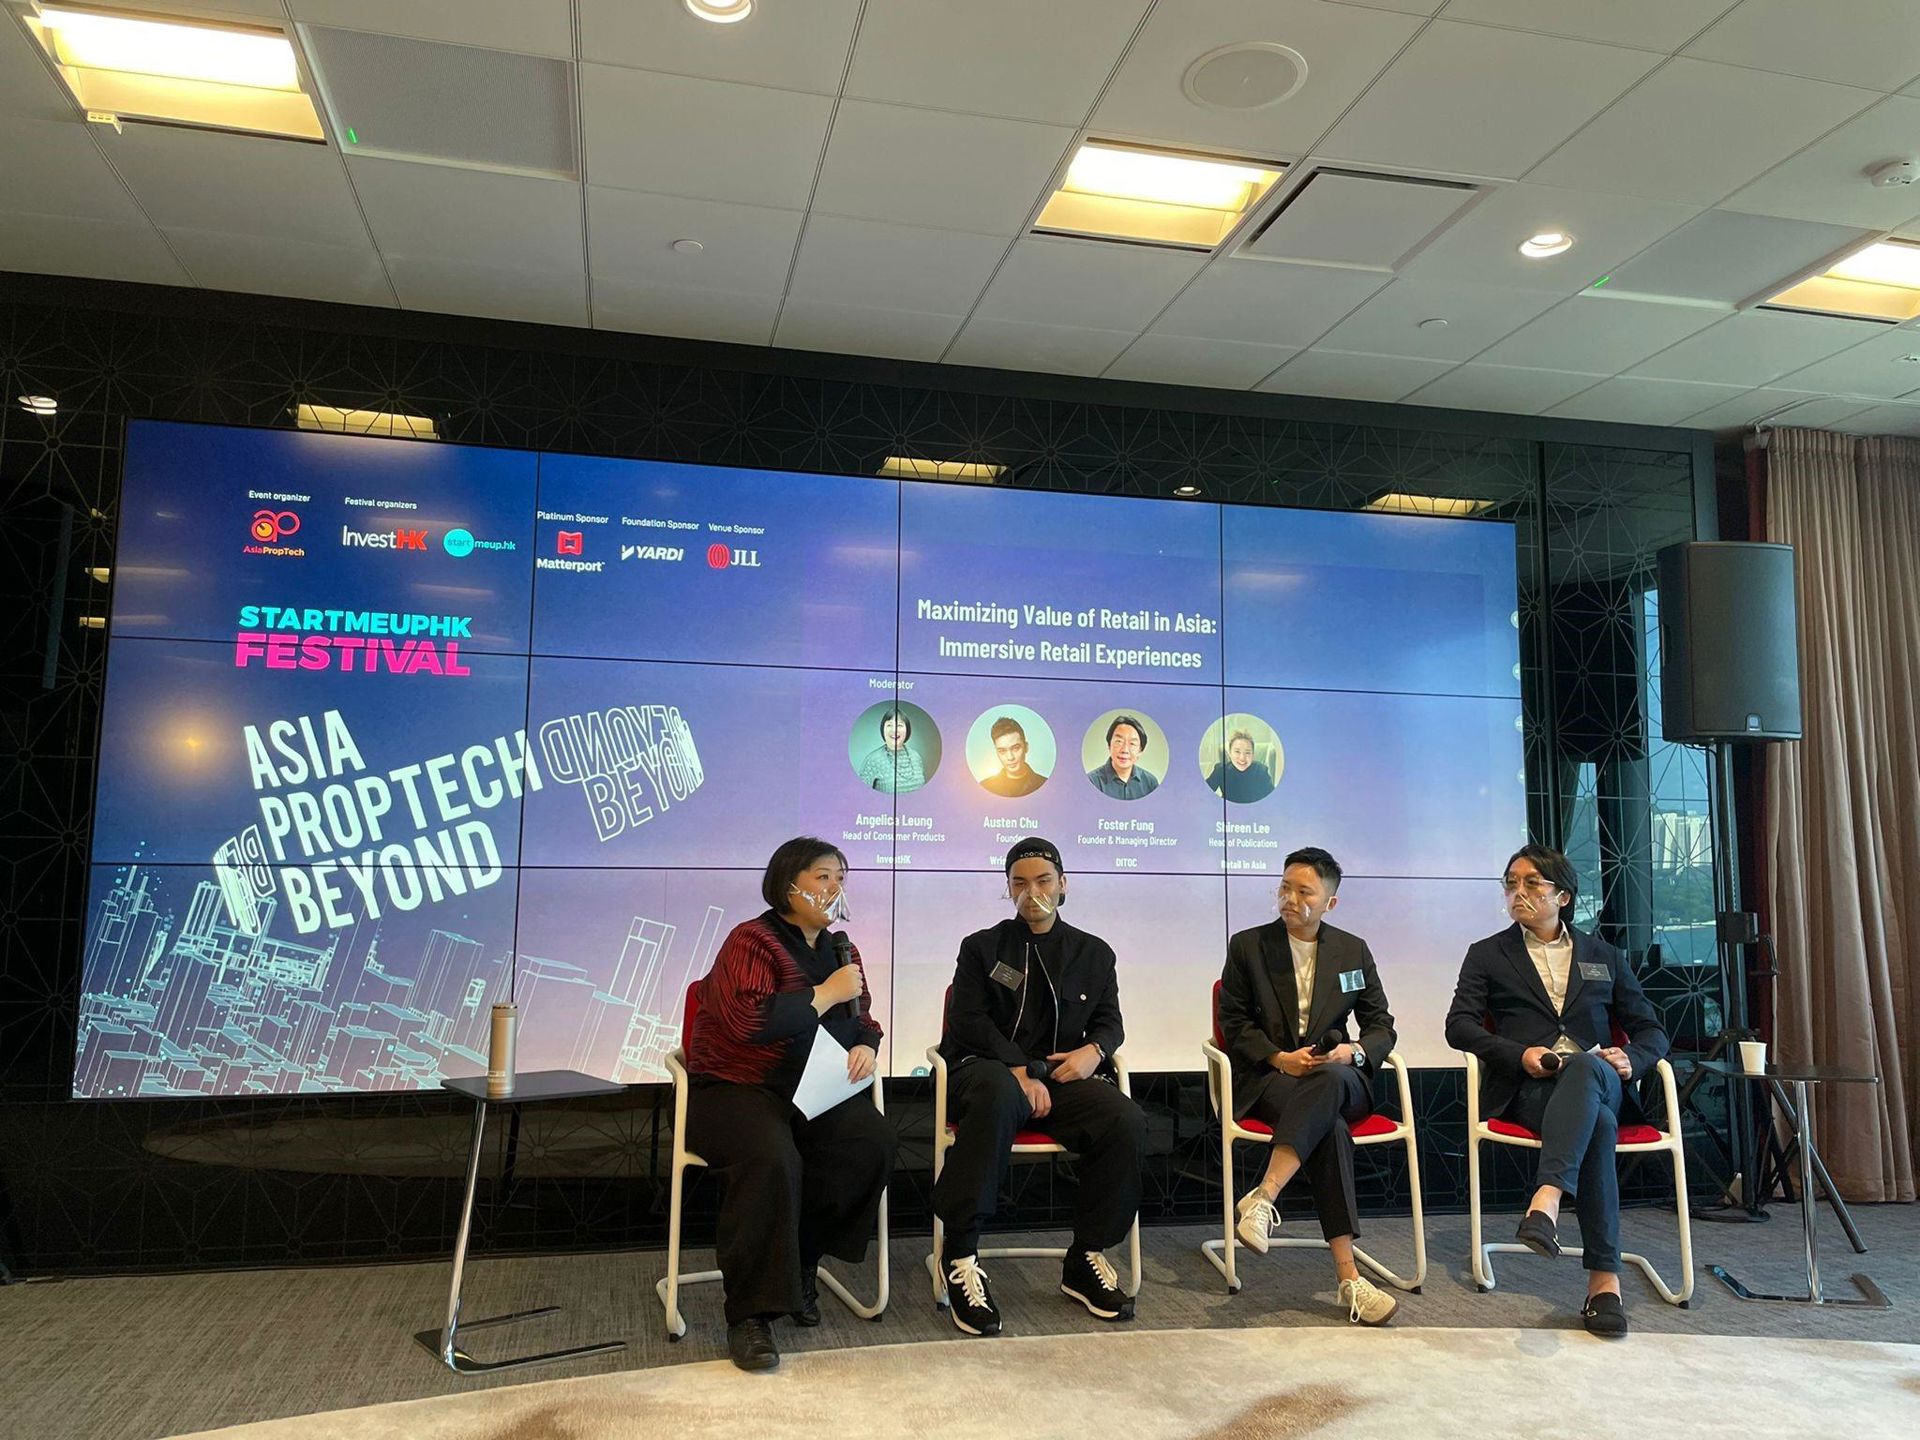 StartmeupHK Festival 2022 returned in a hybrid format this year, featuring 556 speakers and attracting over 20 000 participants from more than 100 countries and territories. Photo shows the Asia PropTech's Asia PropTech Beyond 2022.